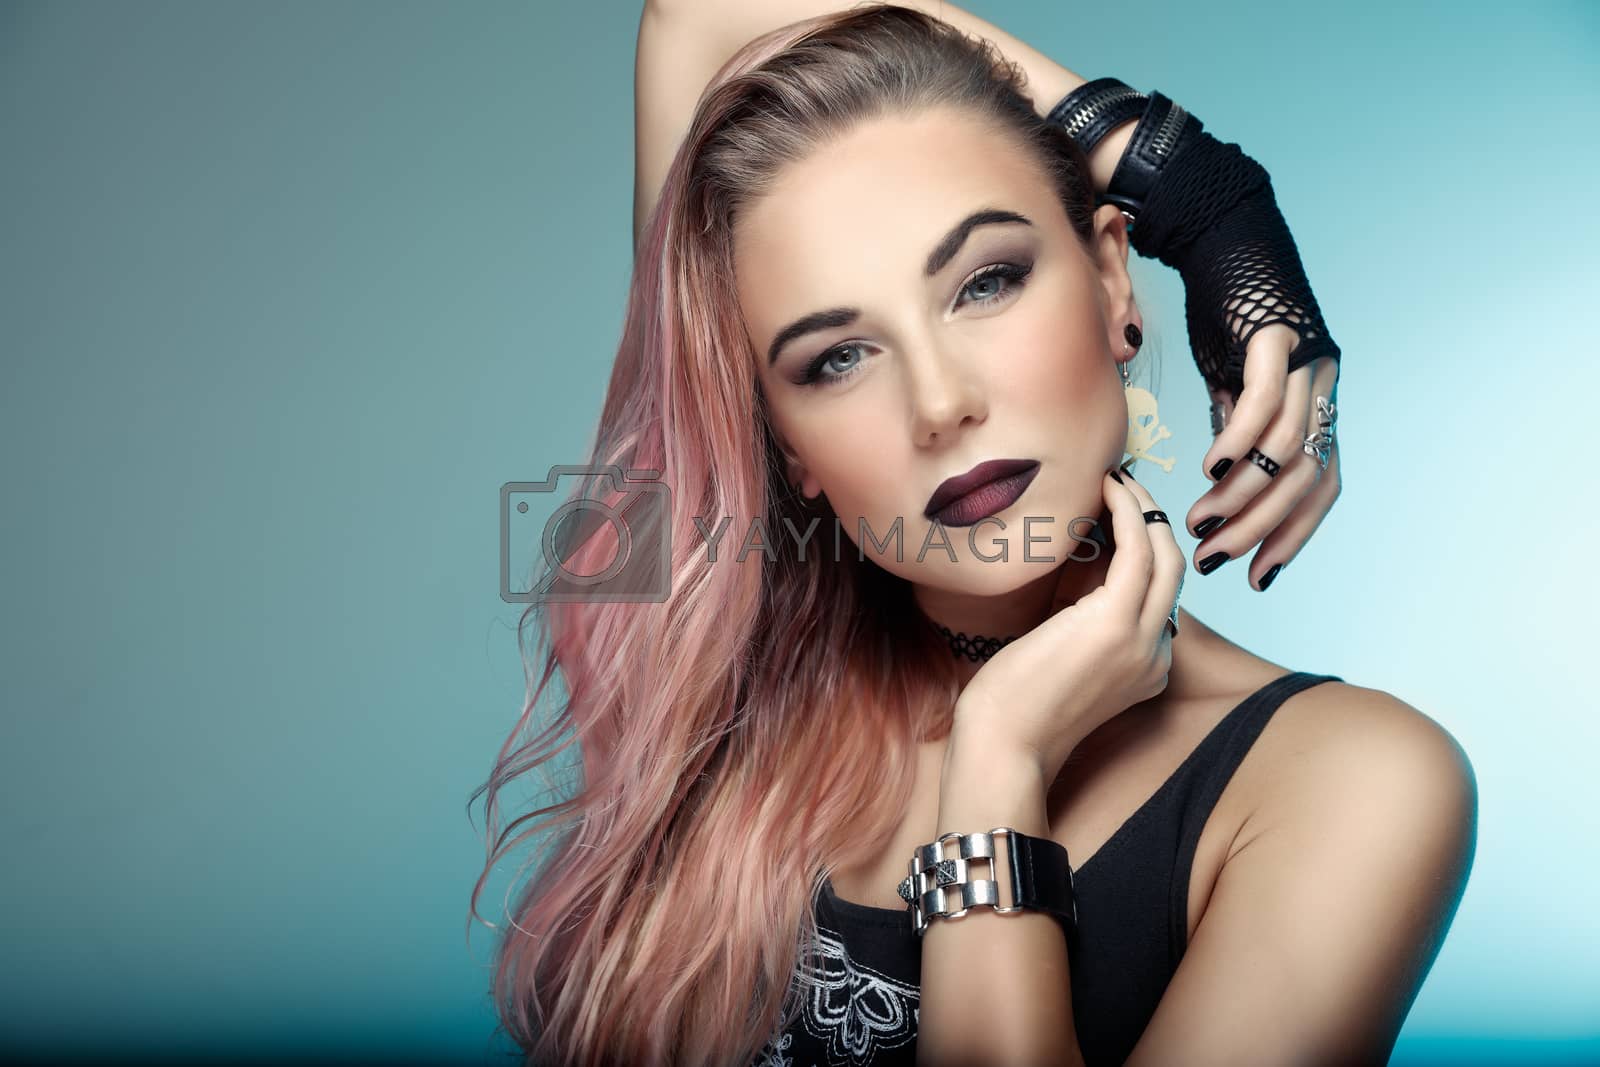 Portrait of a beautiful woman with stylish pink hair over blue background, attractive young girl with dark lips, special style makeup for Gothic party
